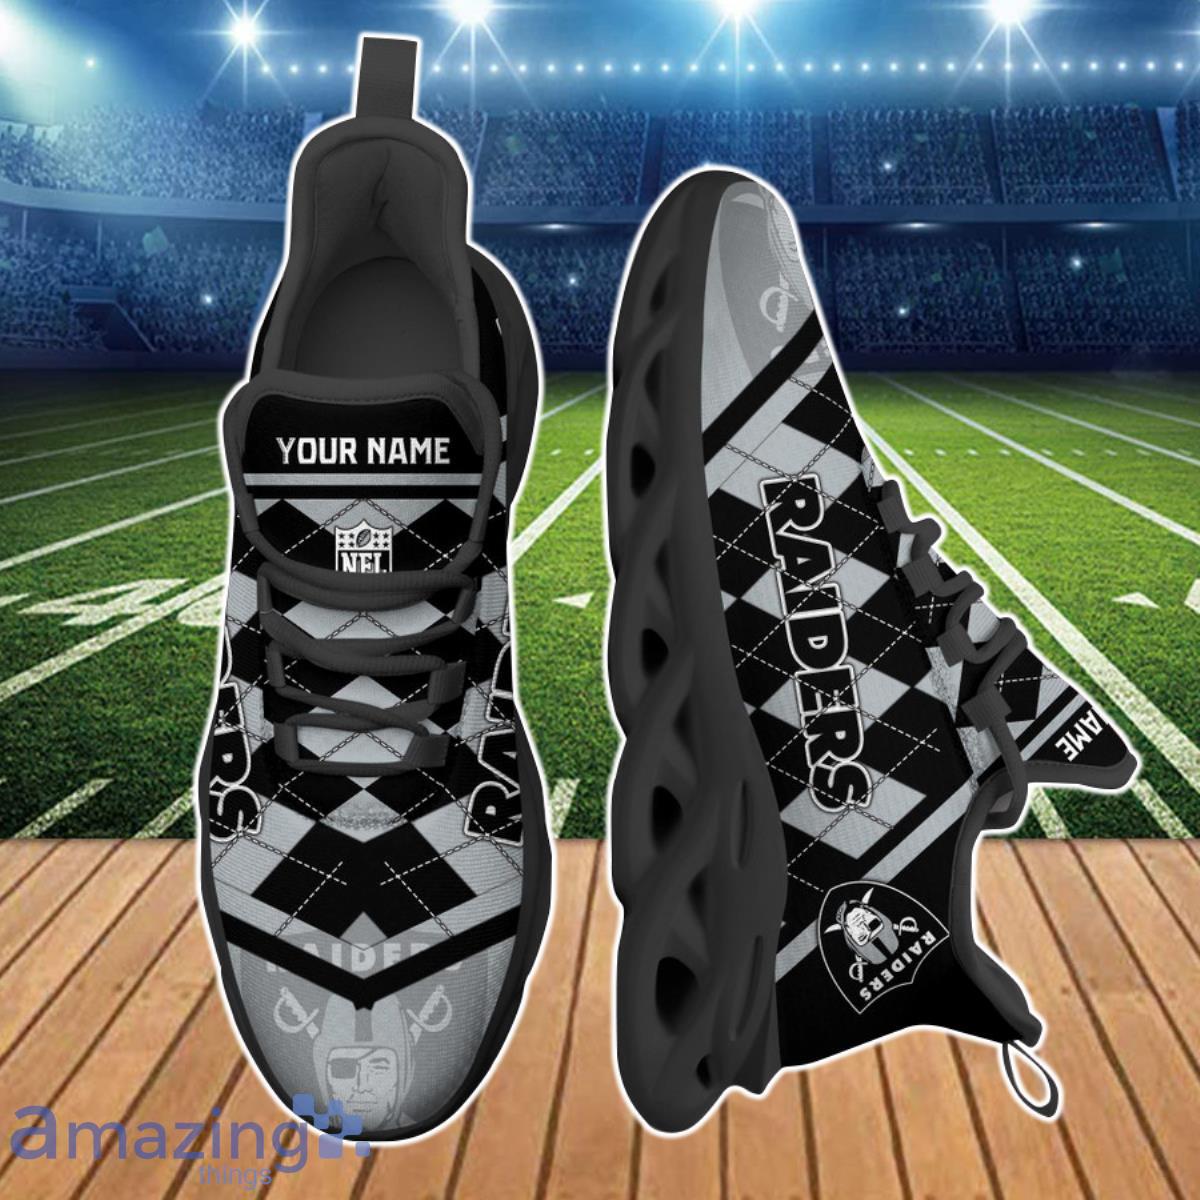 Las Vegas Raiders NFL Clunky Max Soul Shoes Custom Name Ideal Gift